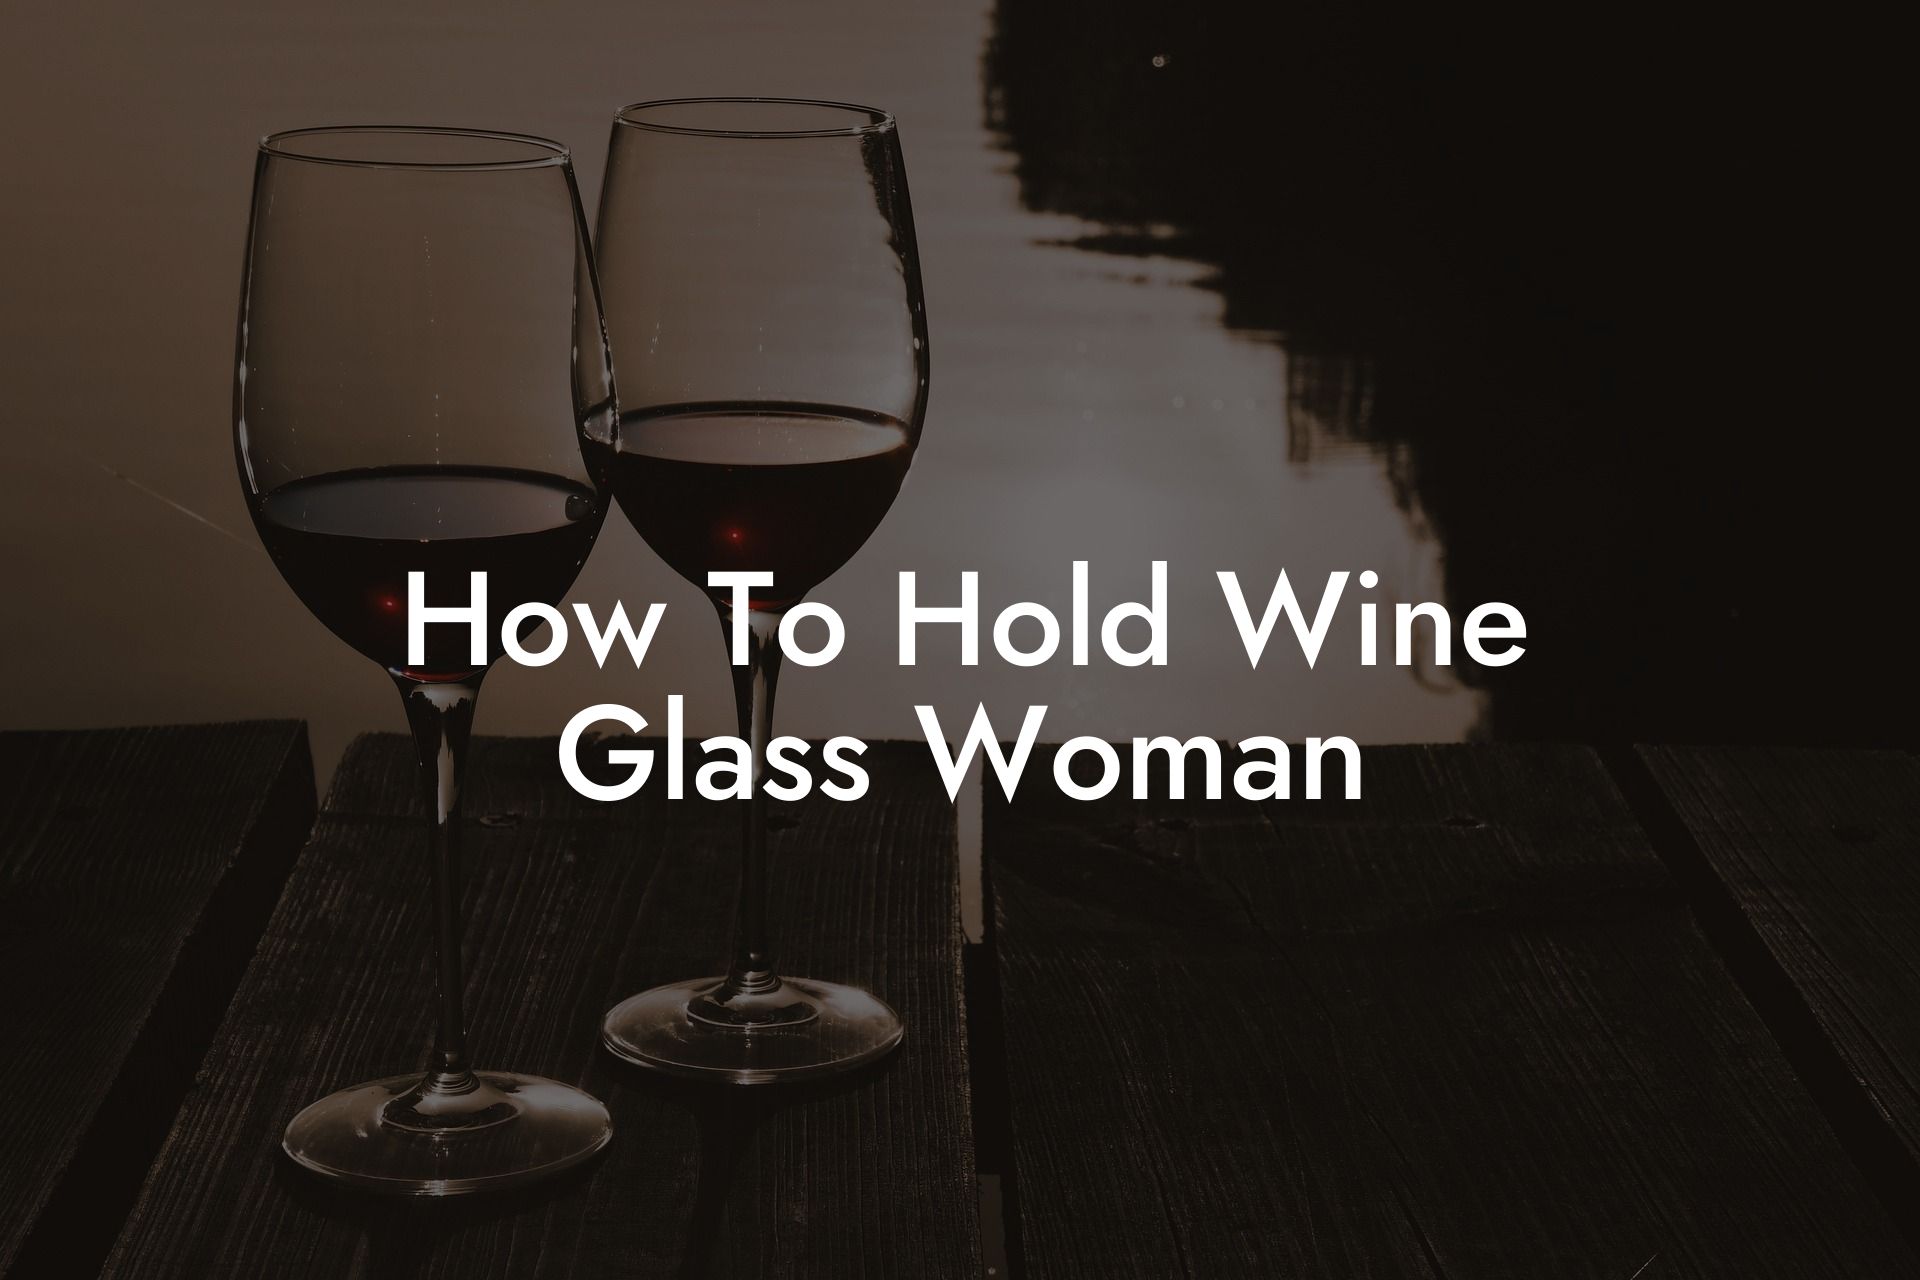 How To Hold Wine Glass Woman